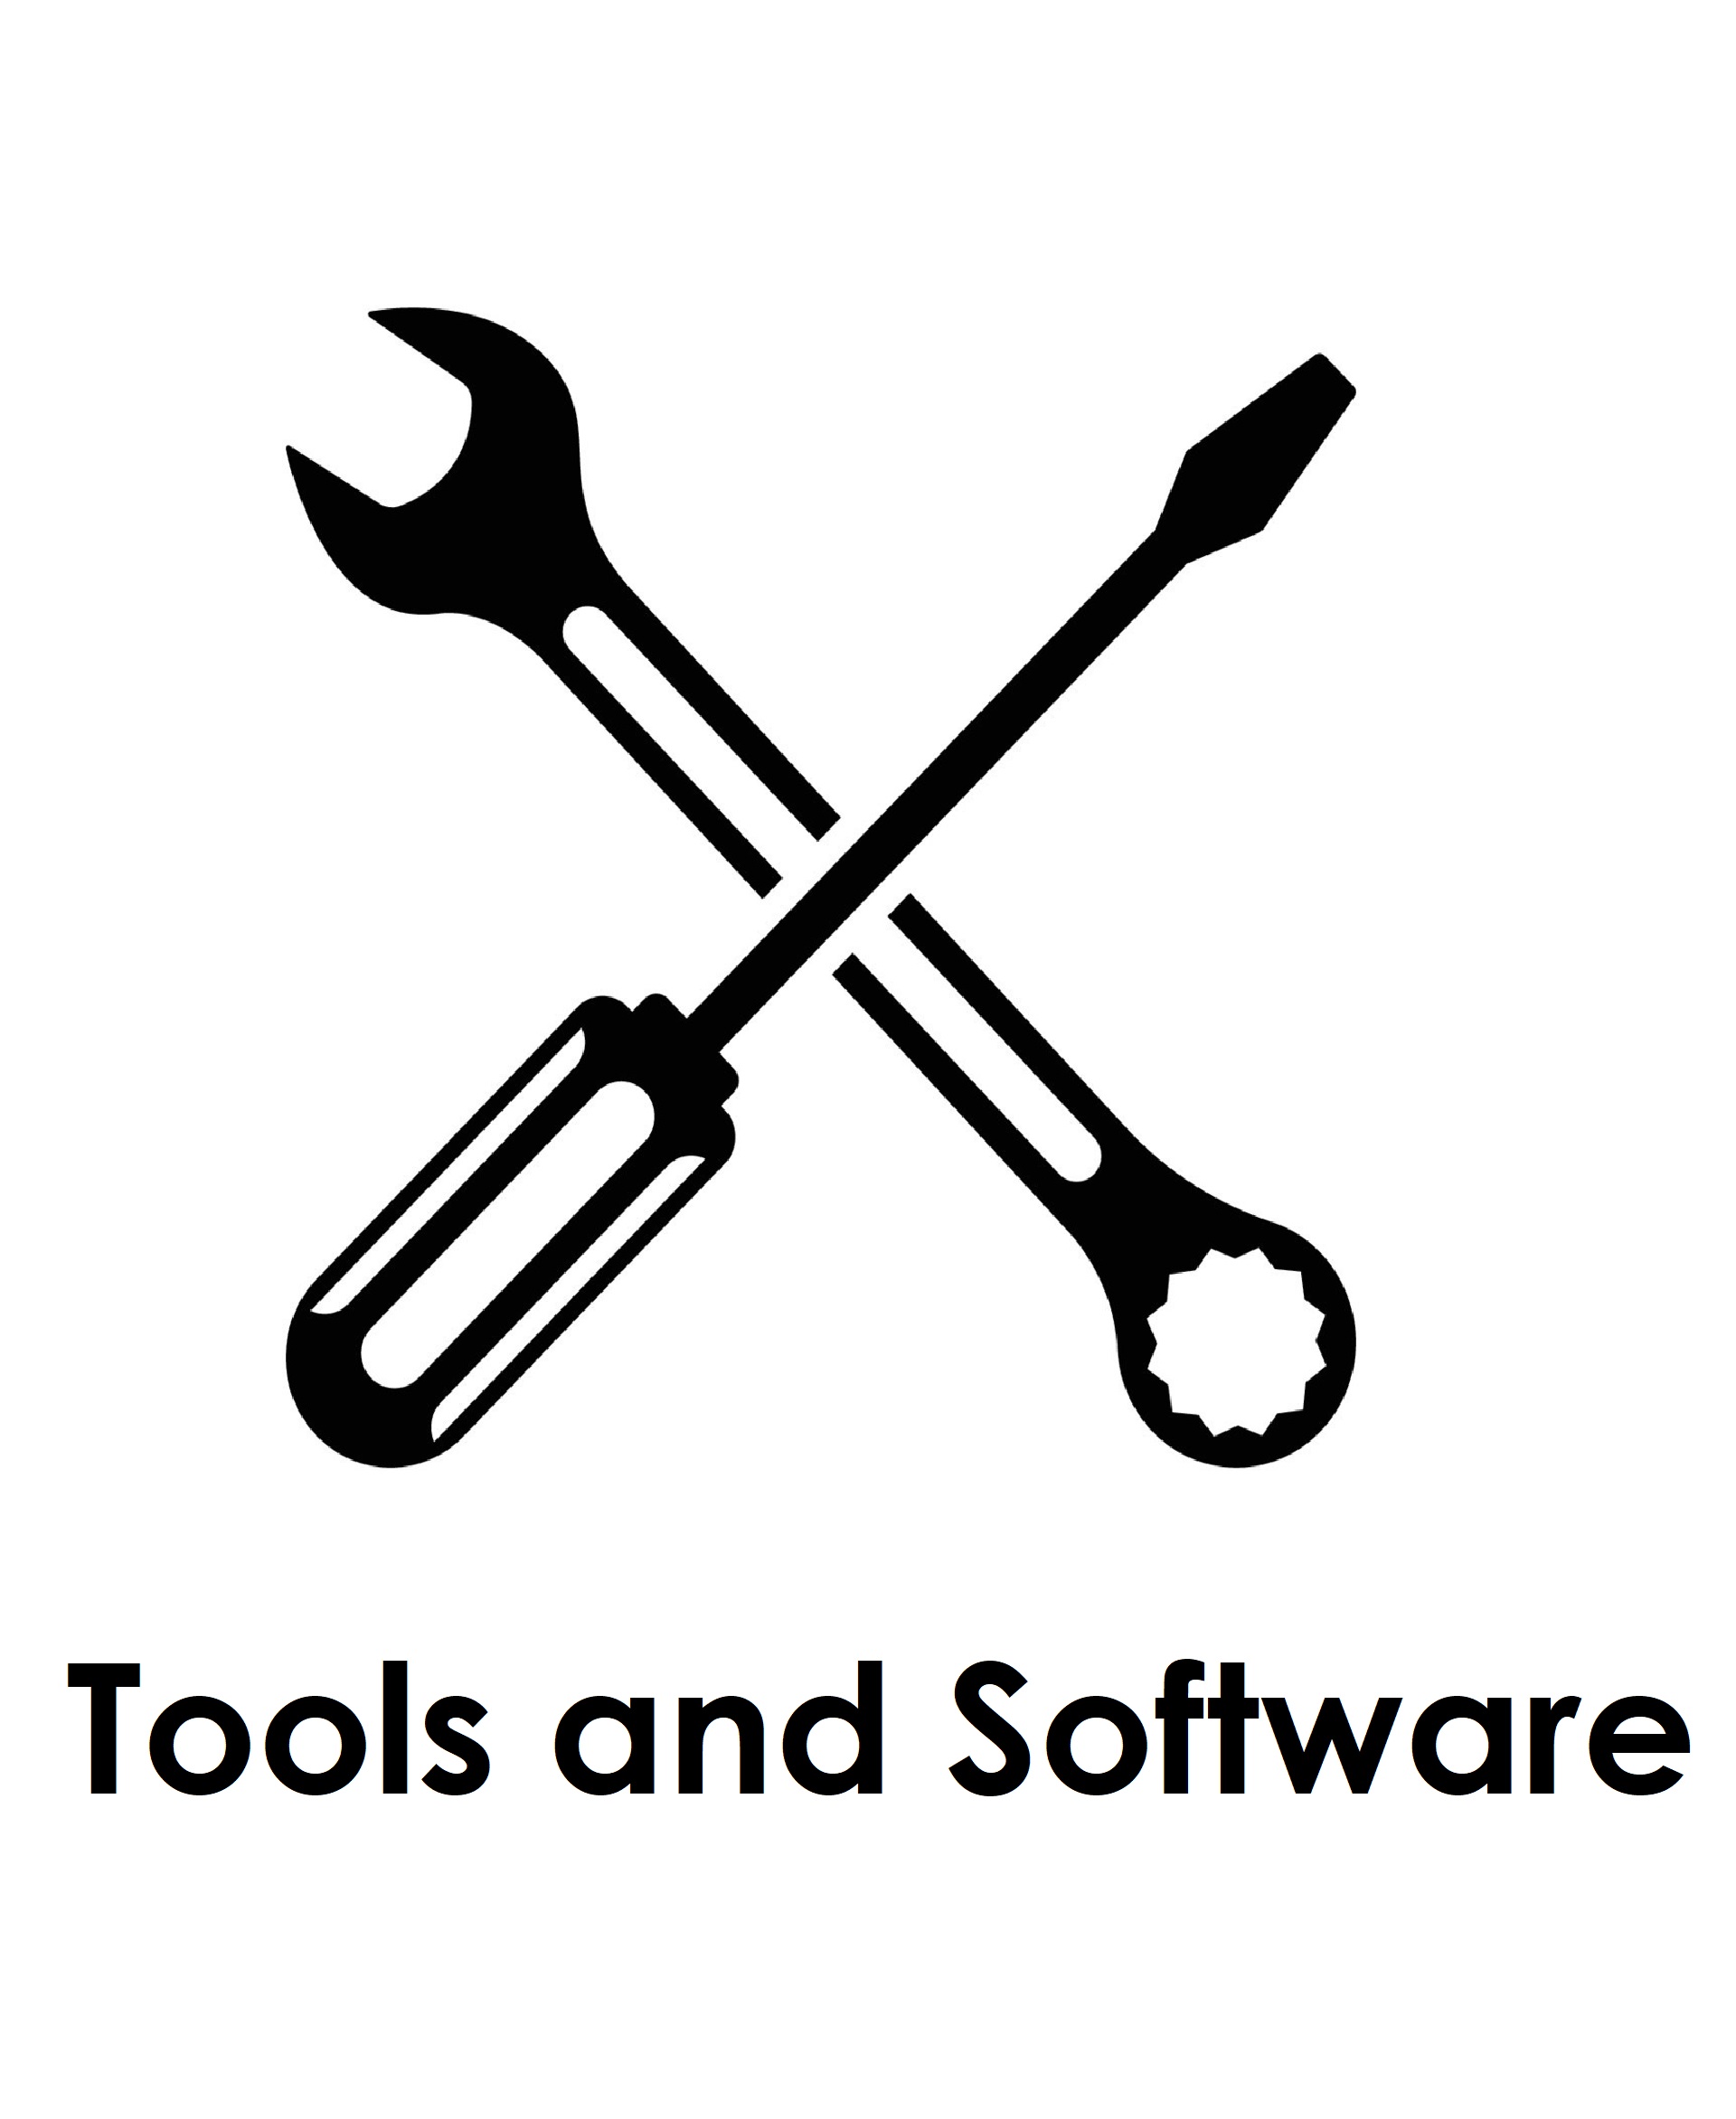 Tools and Software